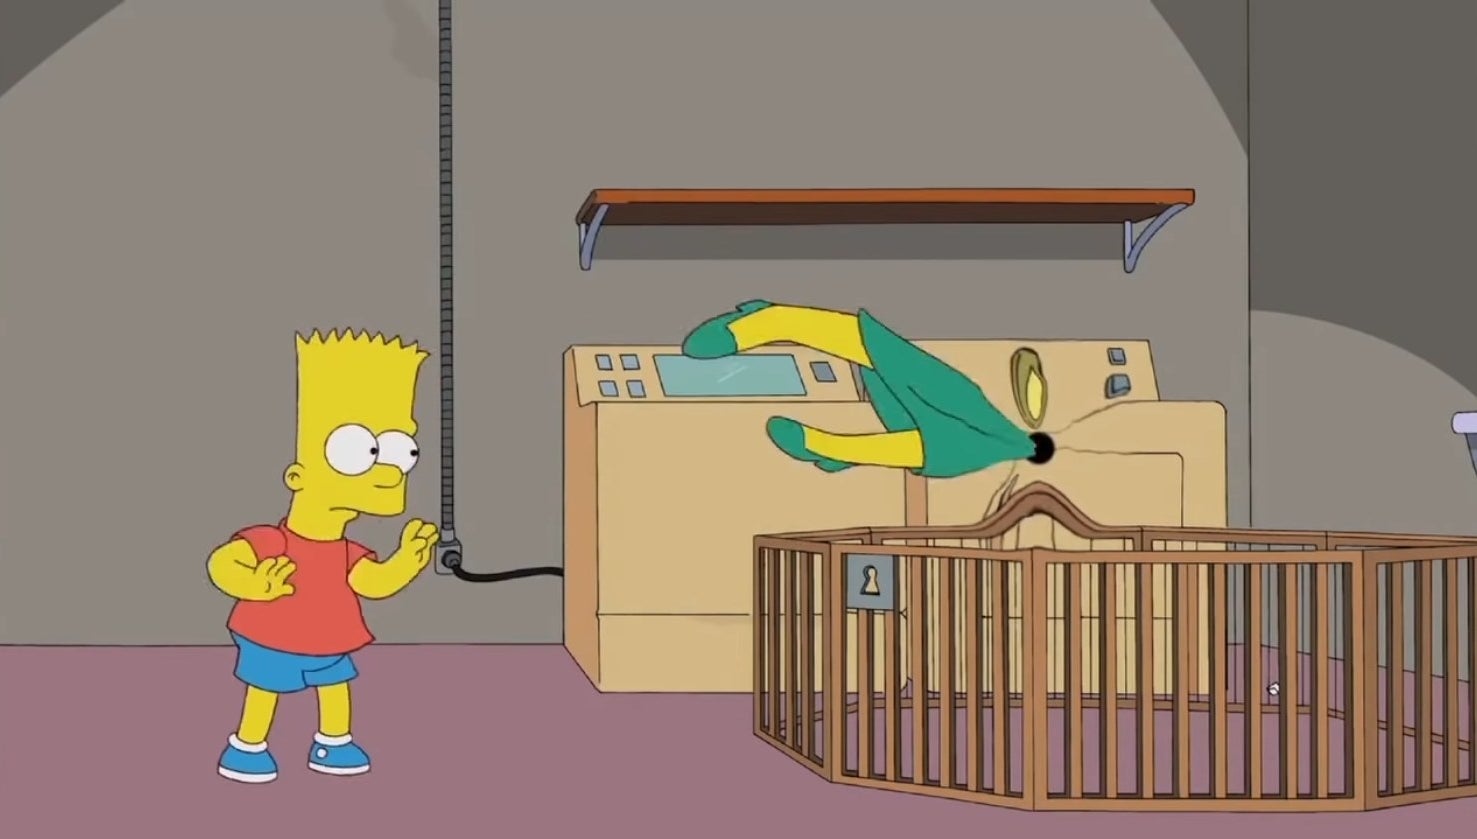 Bart pushes a teacher into a black hole in Treehouse of Horror XXIII